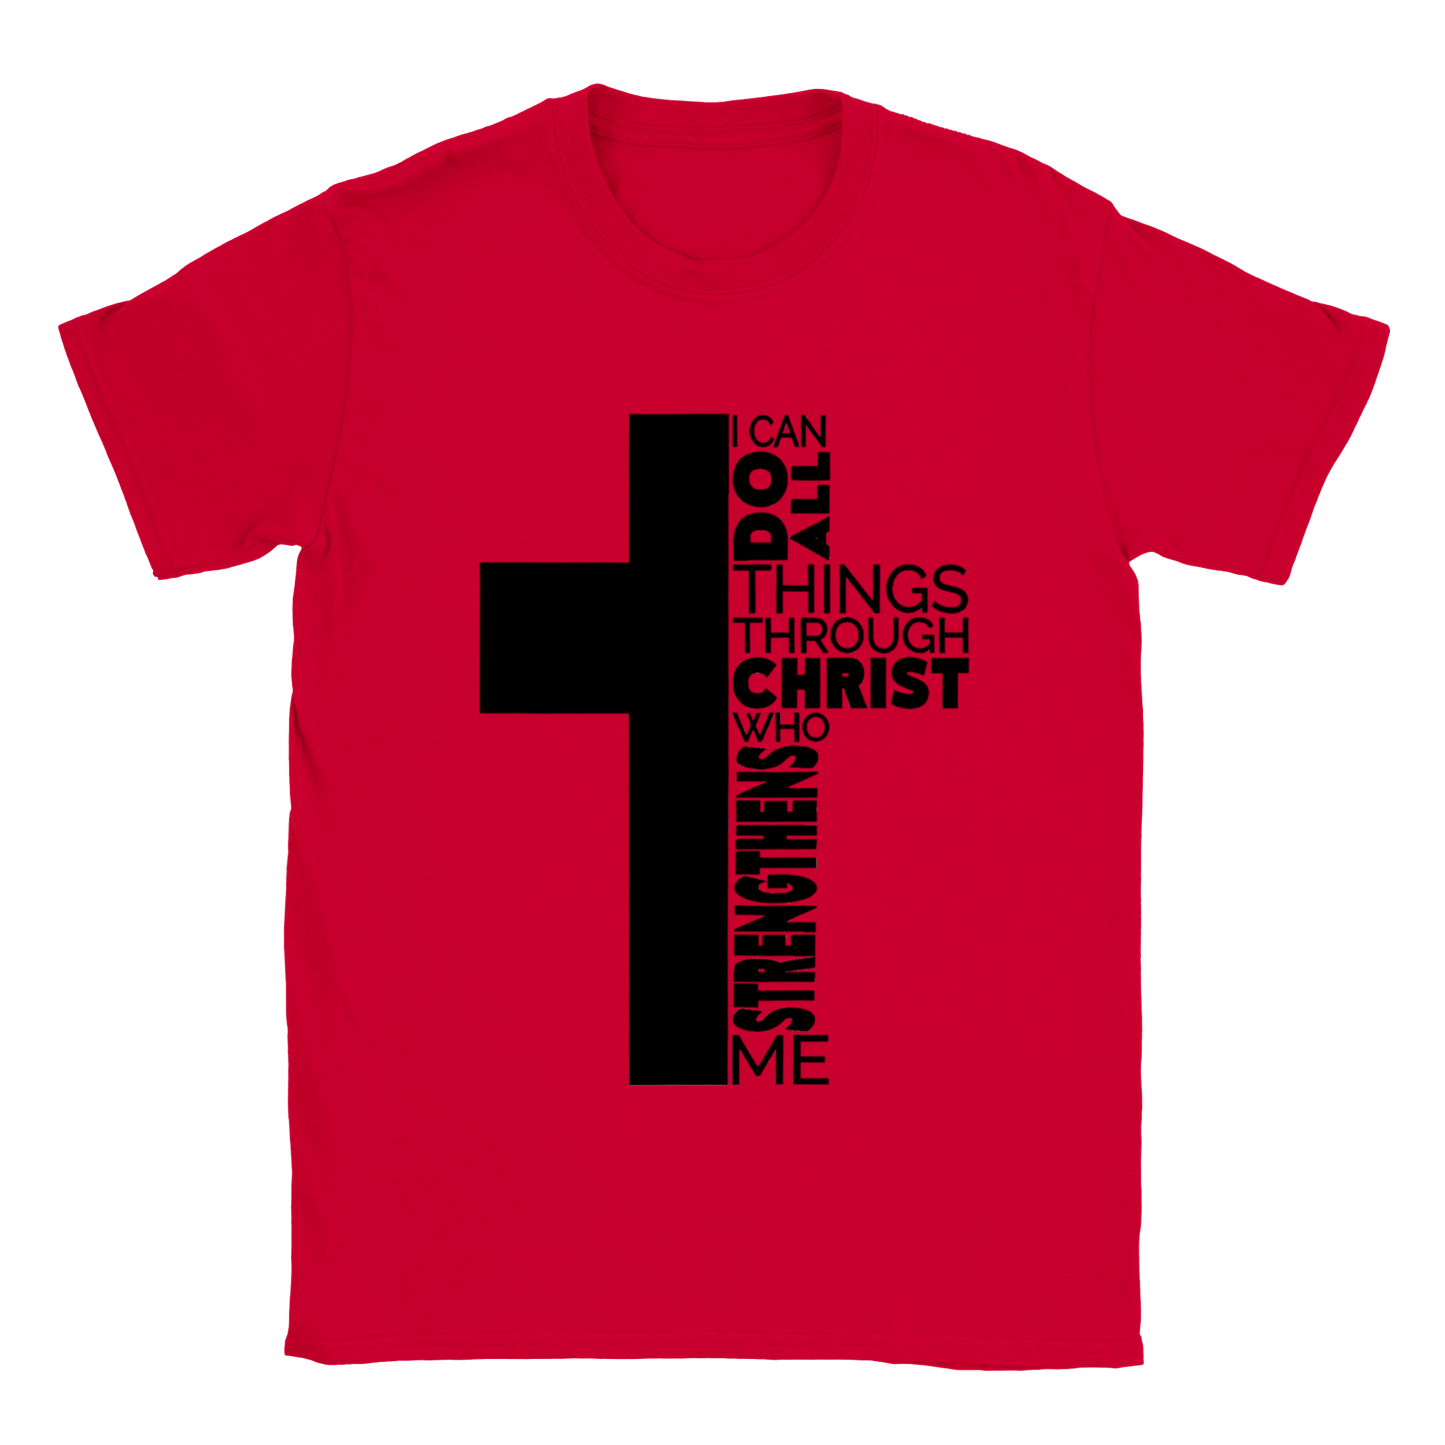 I Can Do All Things Through Christ.. T-shirt